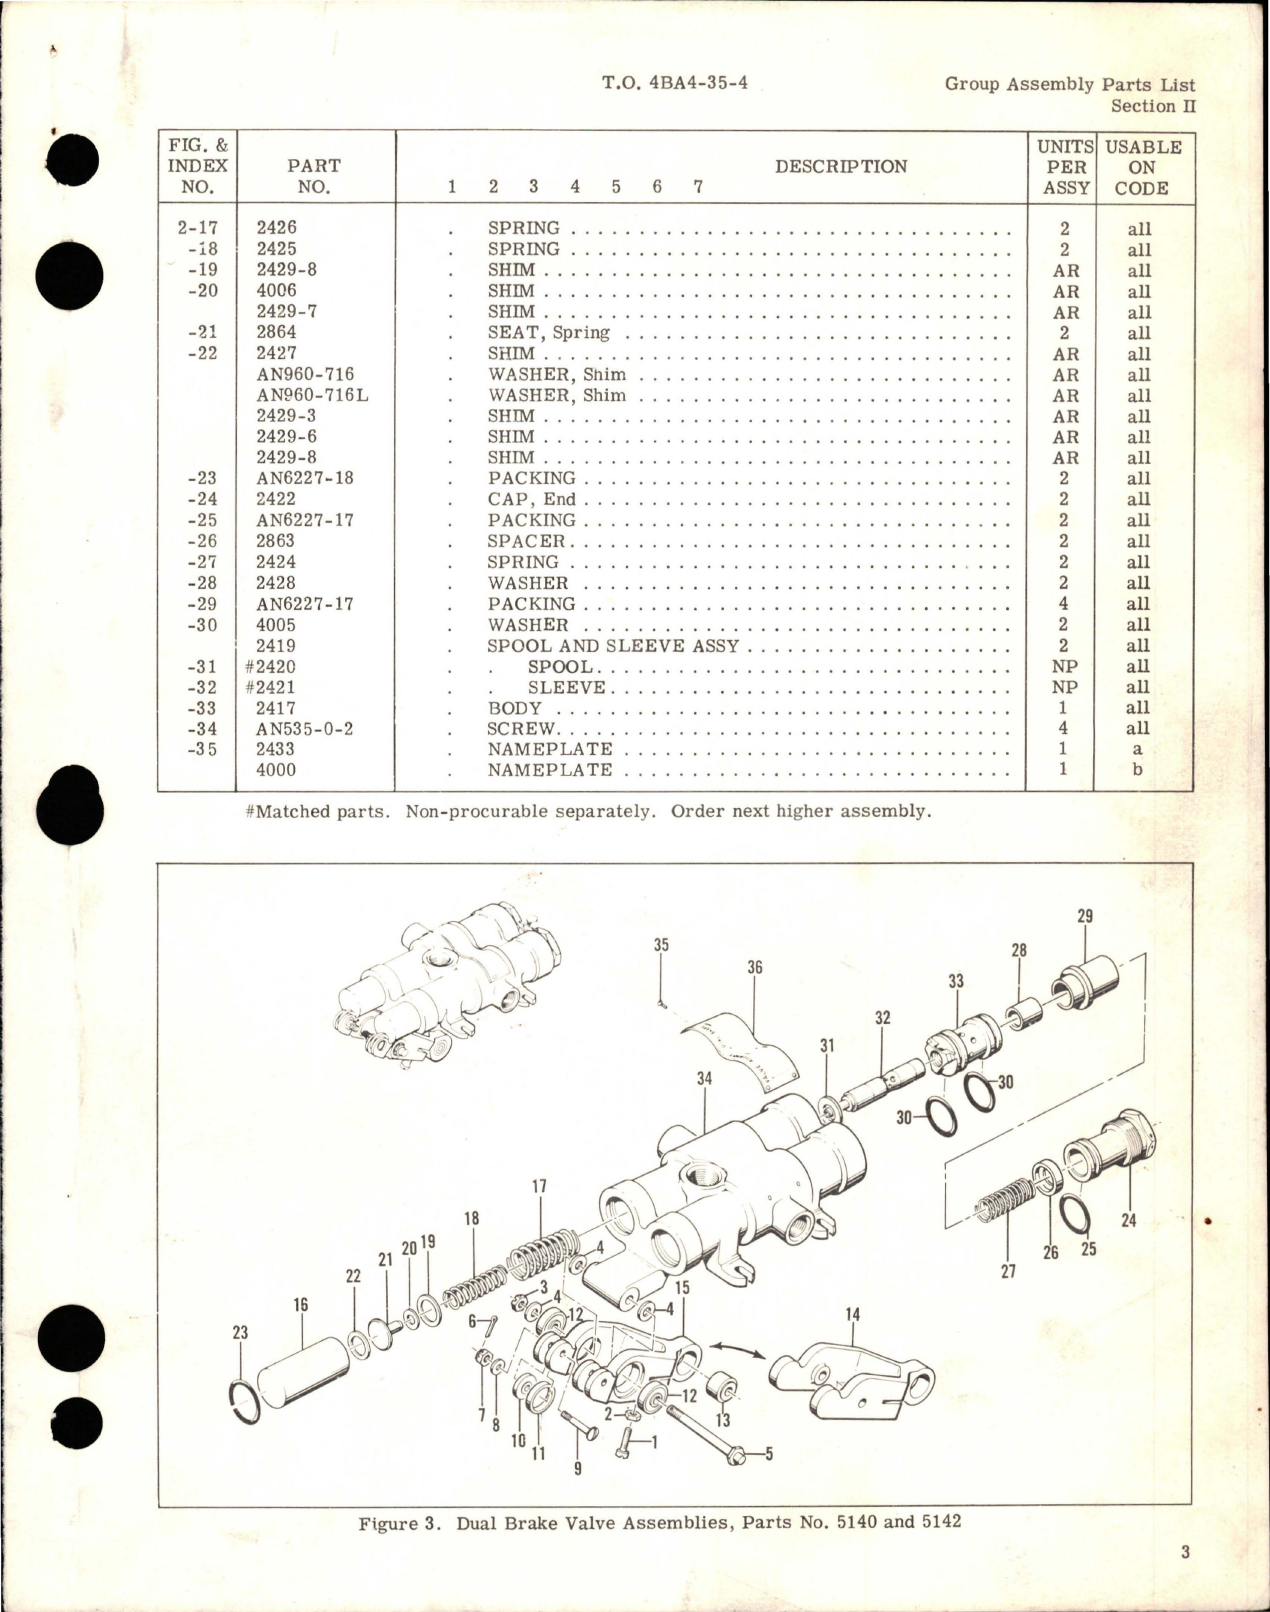 Sample page 5 from AirCorps Library document: Illustrated Parts Breakdown for Dual Brake Valves - Parts 1920, 1920-3, 5140, and 5142 